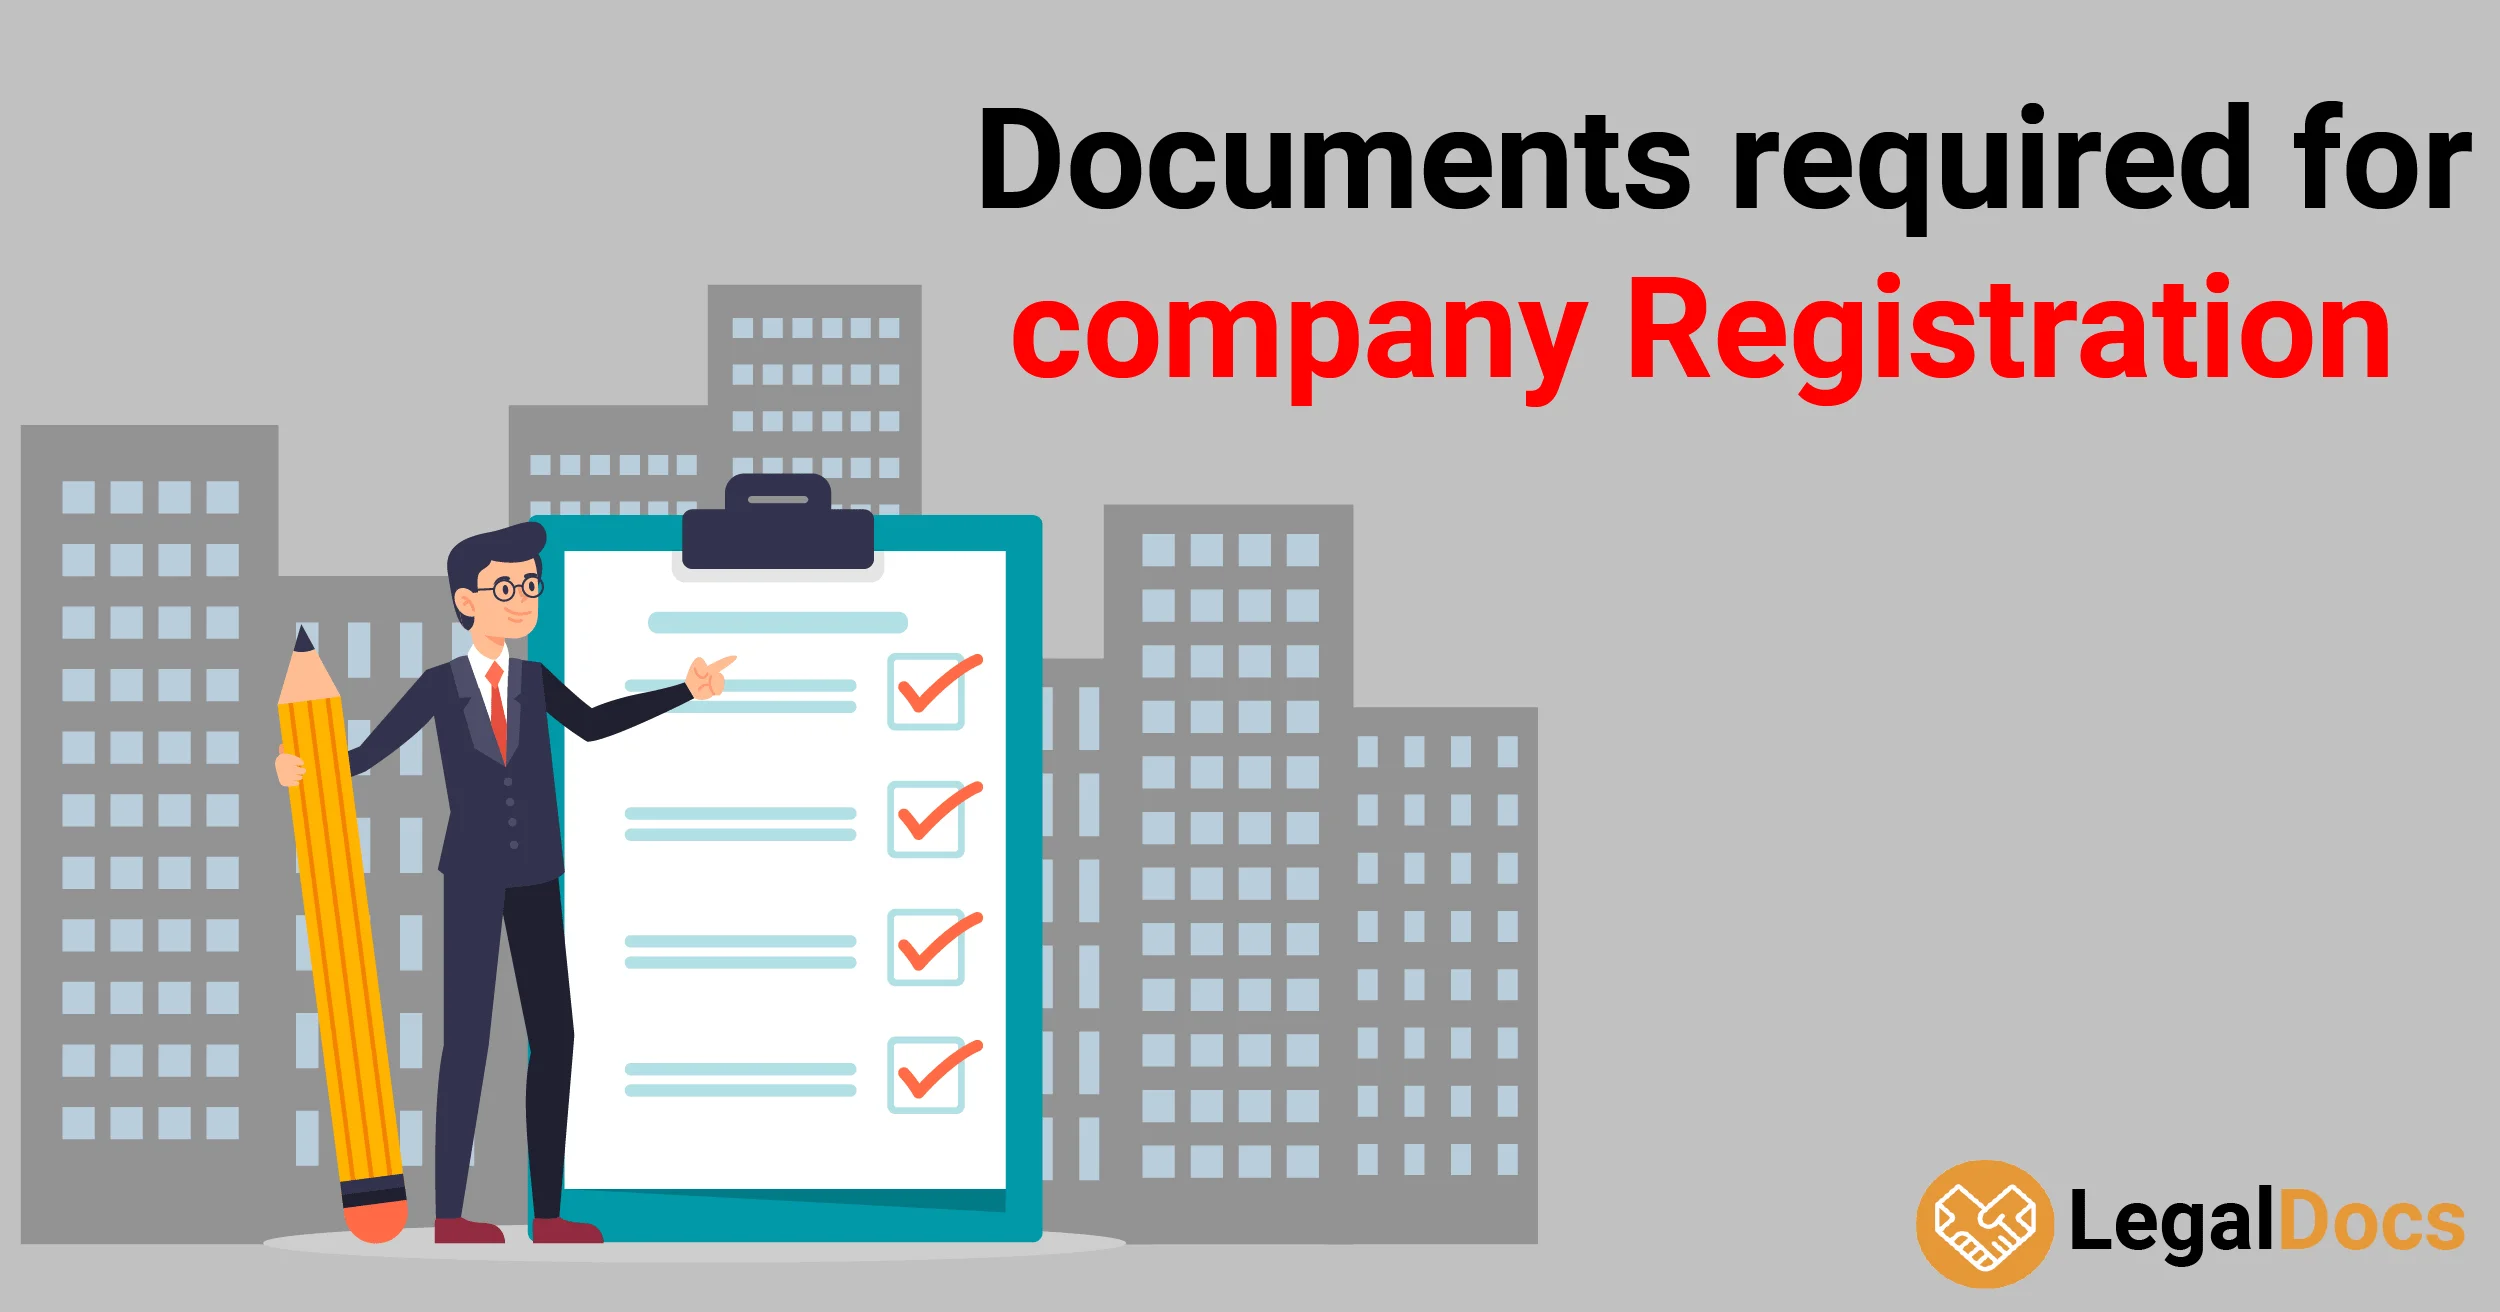 Documents Required for Company Registration - LegalDocs